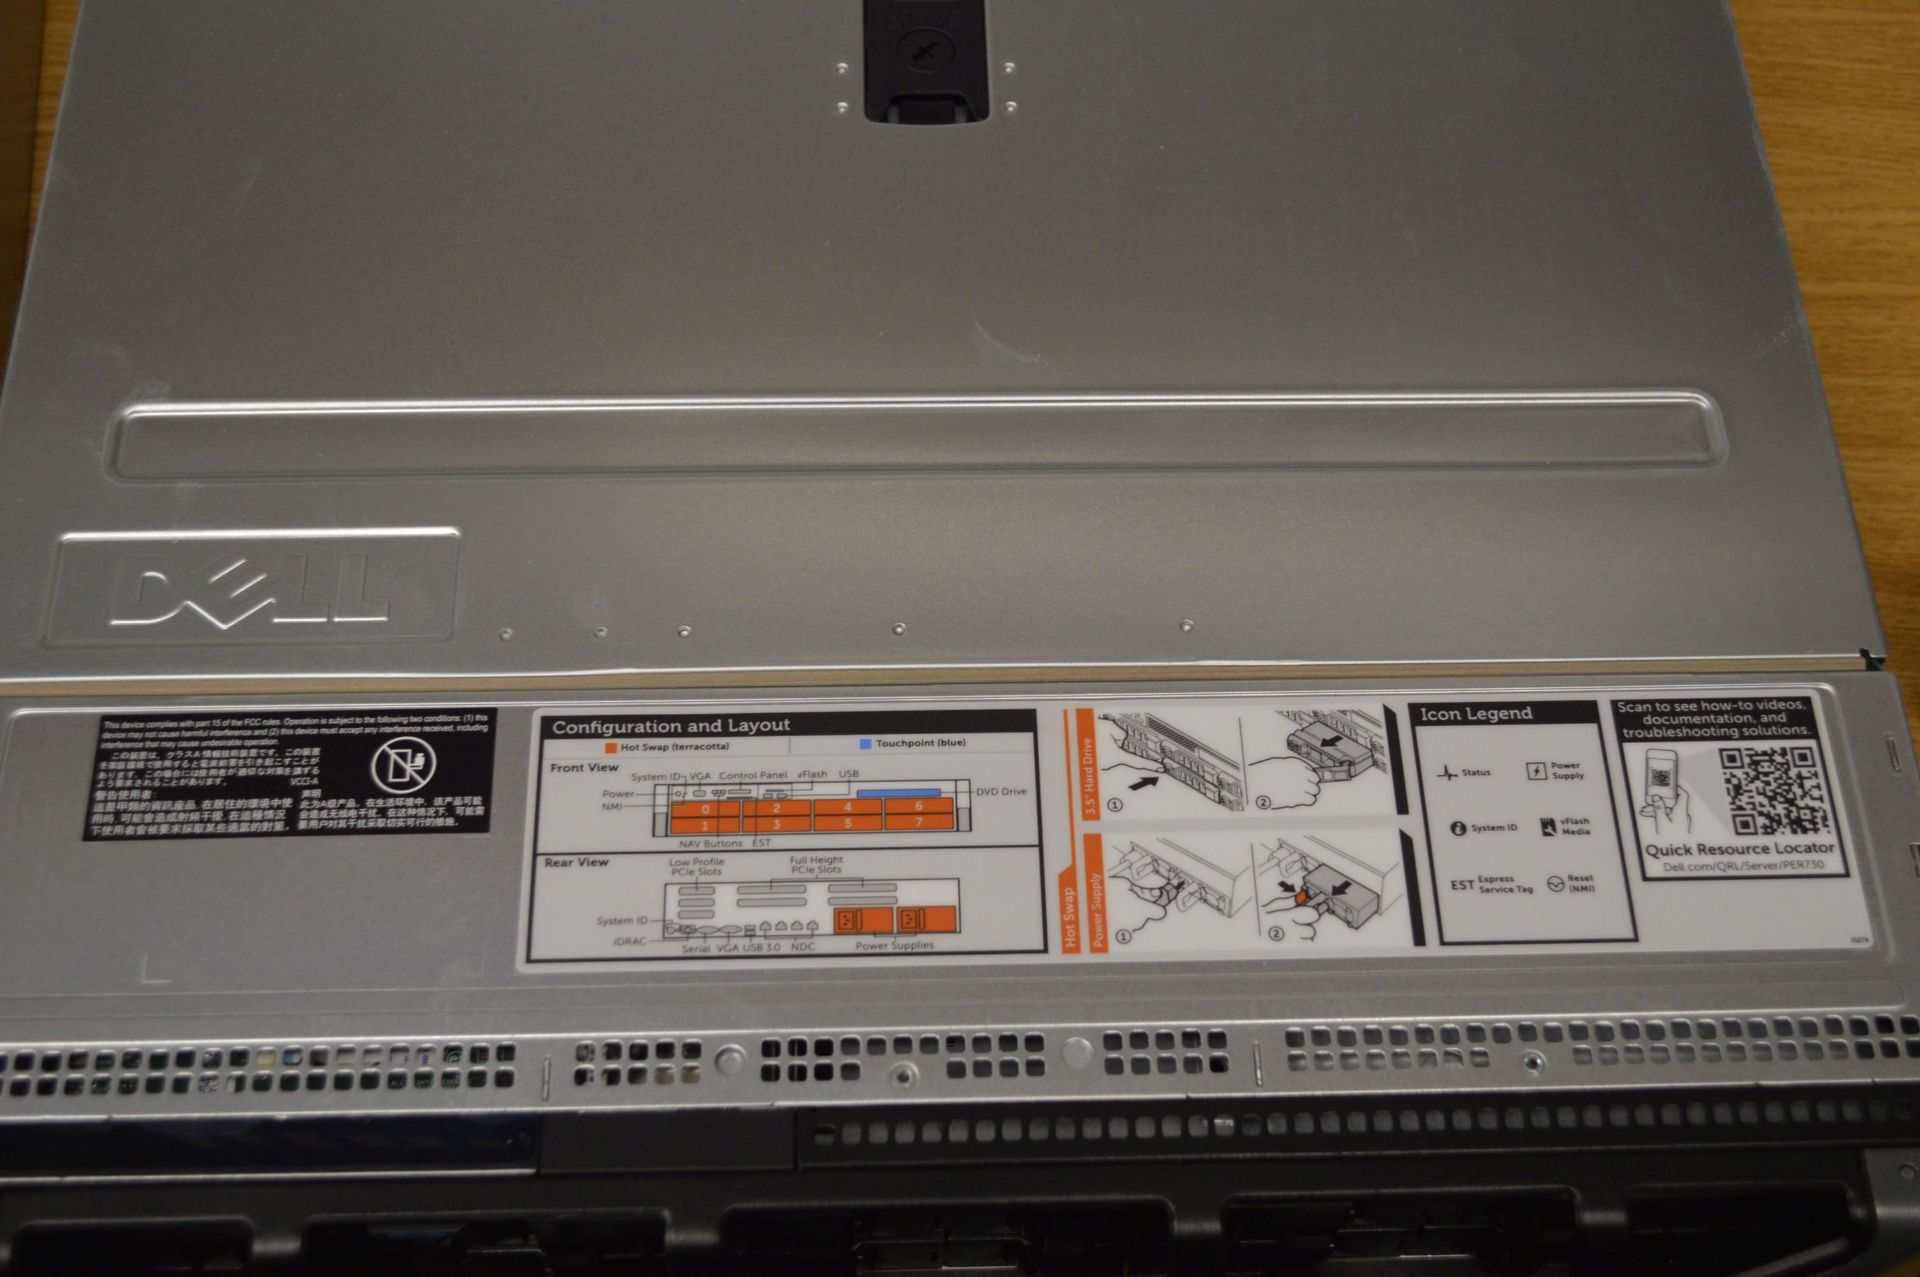 Dell Poweredge R730 Rack Mount Server, with Intel Xeon processor (kindly offered for sale on - Image 2 of 3